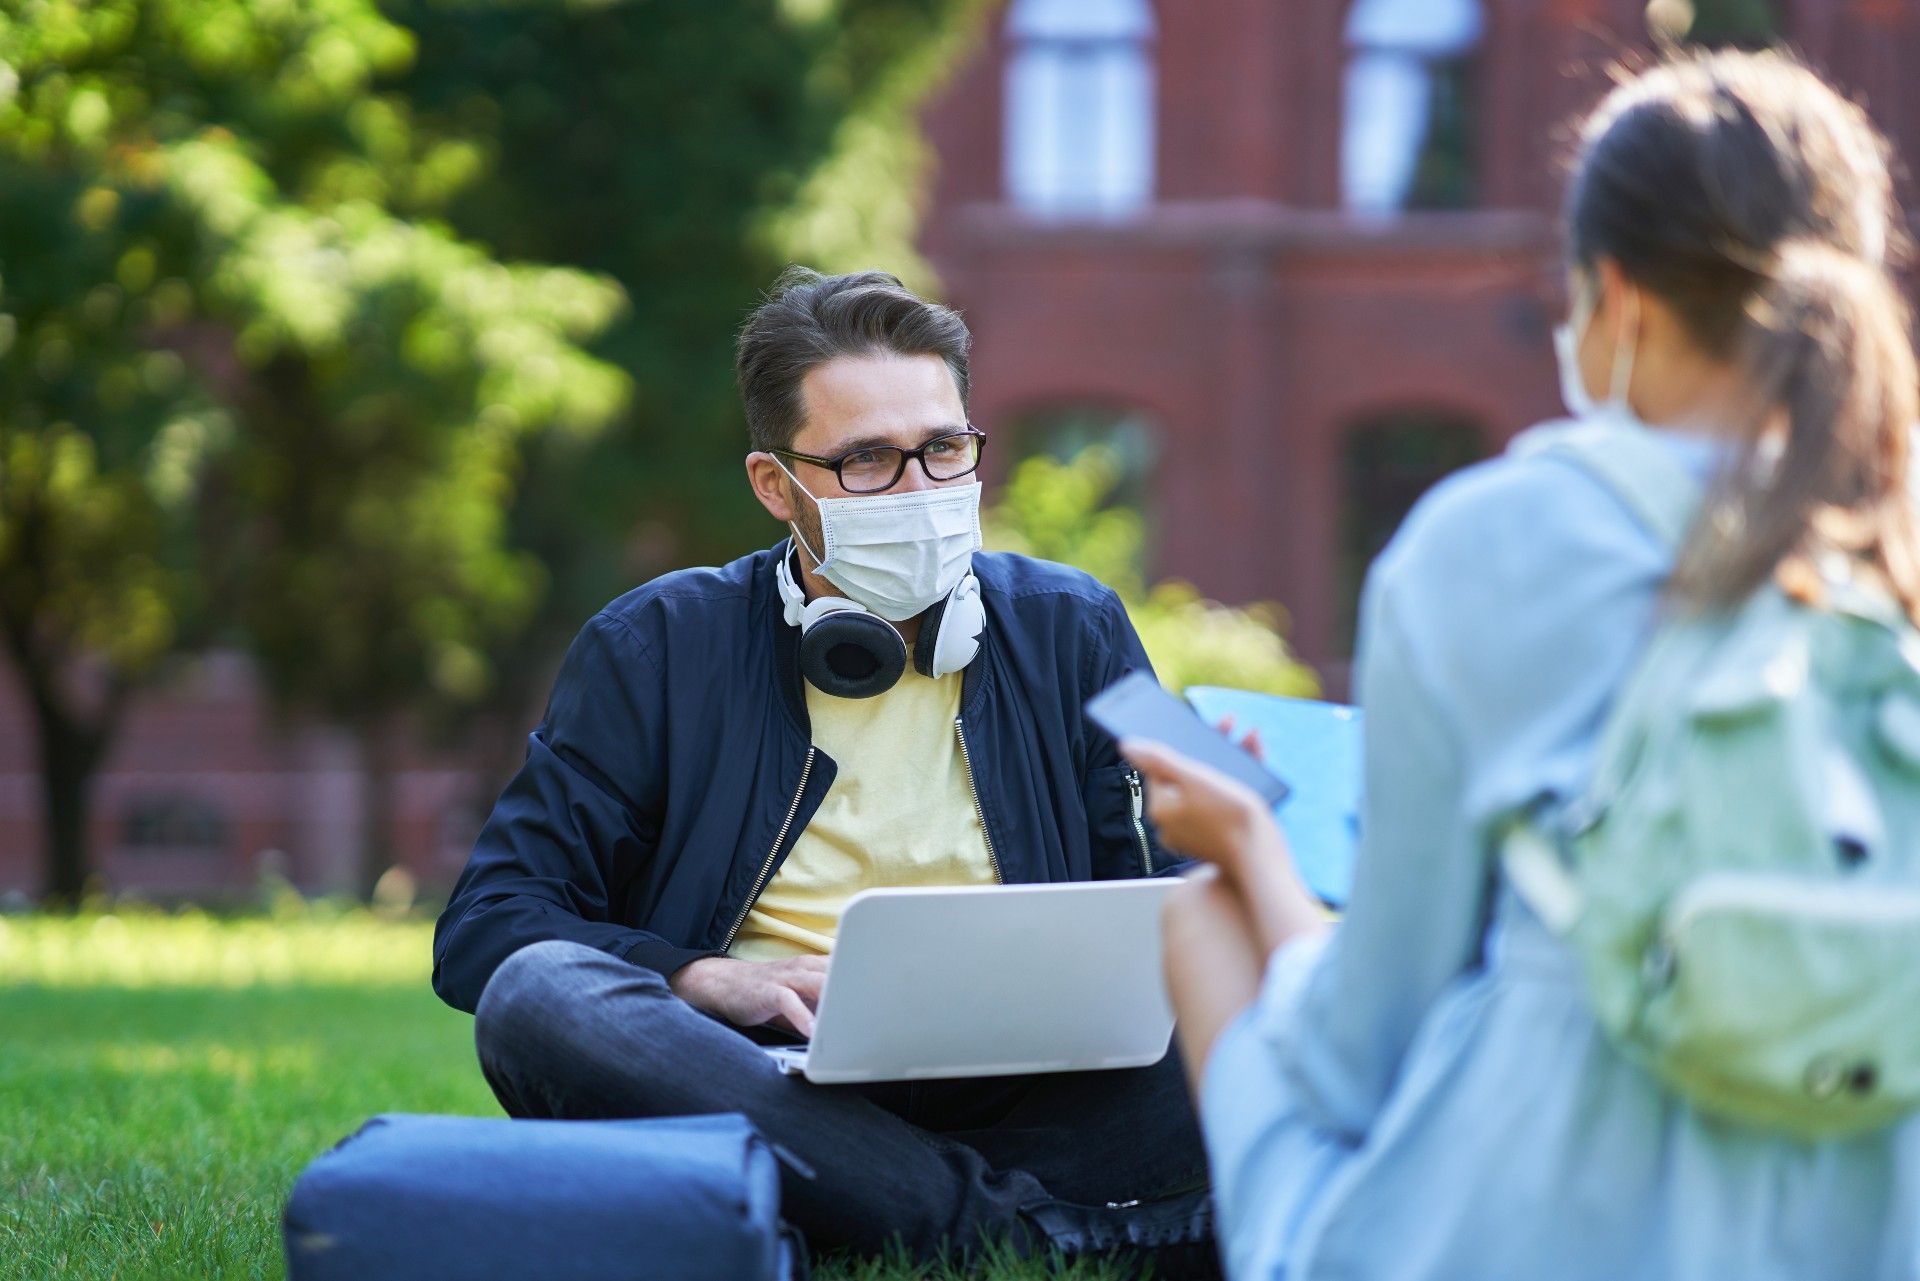 University students in masks sit on the grass while working and studying - rights at university